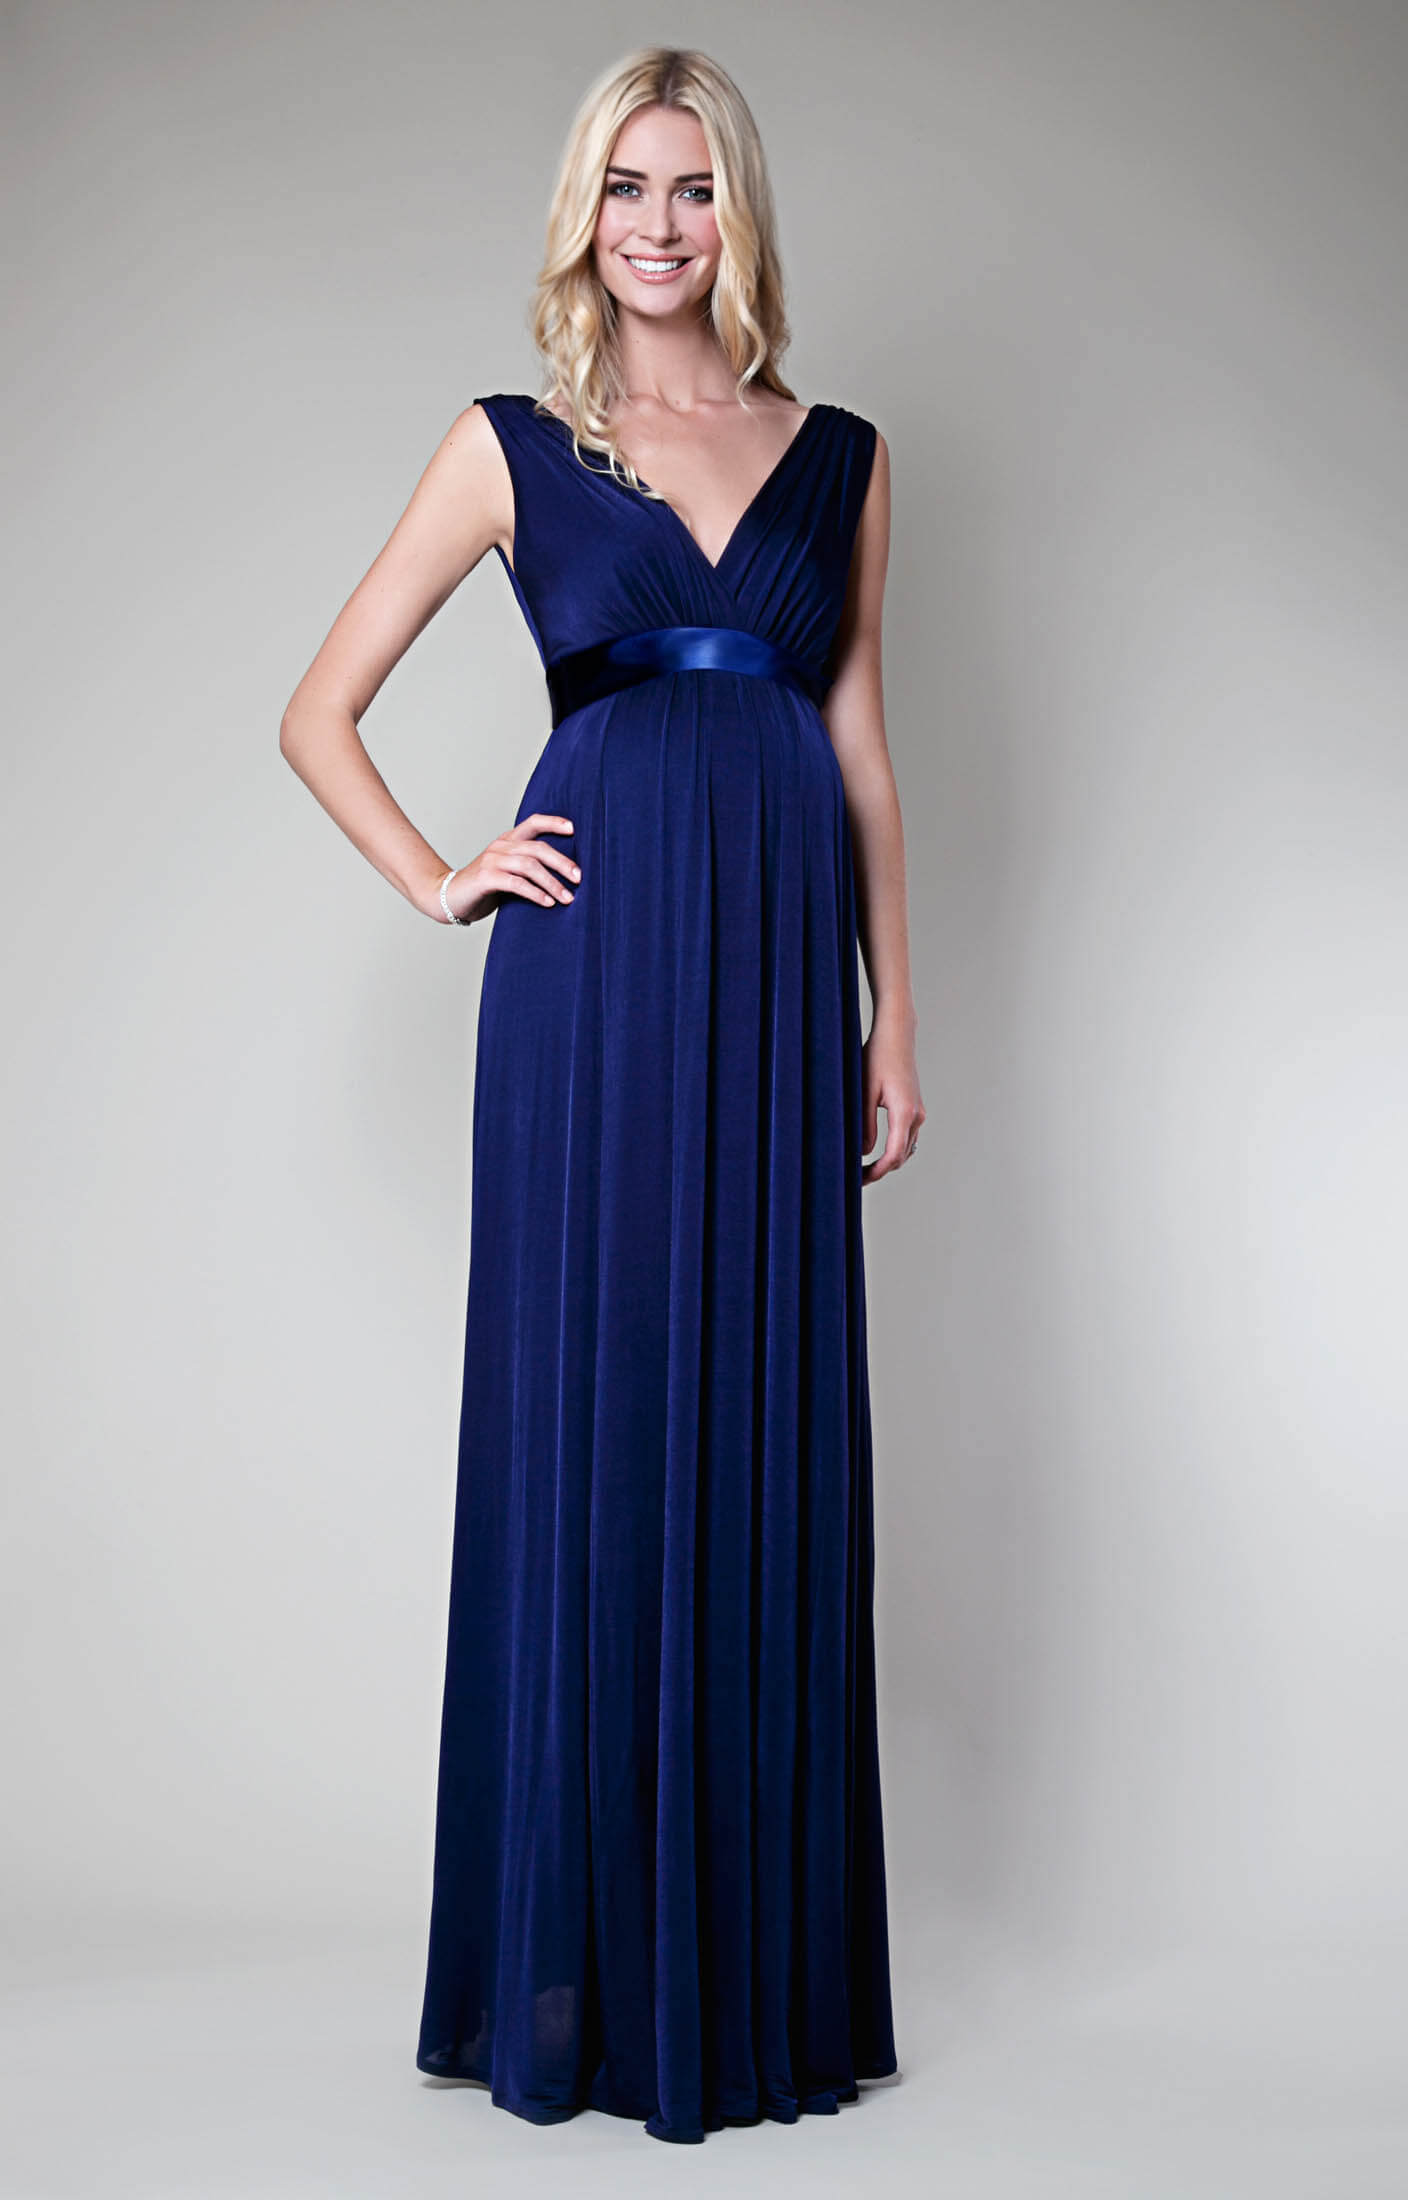 Anastasia Maternity Gown Eclipse Blue - Maternity Wedding Dresses, Evening  Wear and Party Clothes by Tiffany Rose US